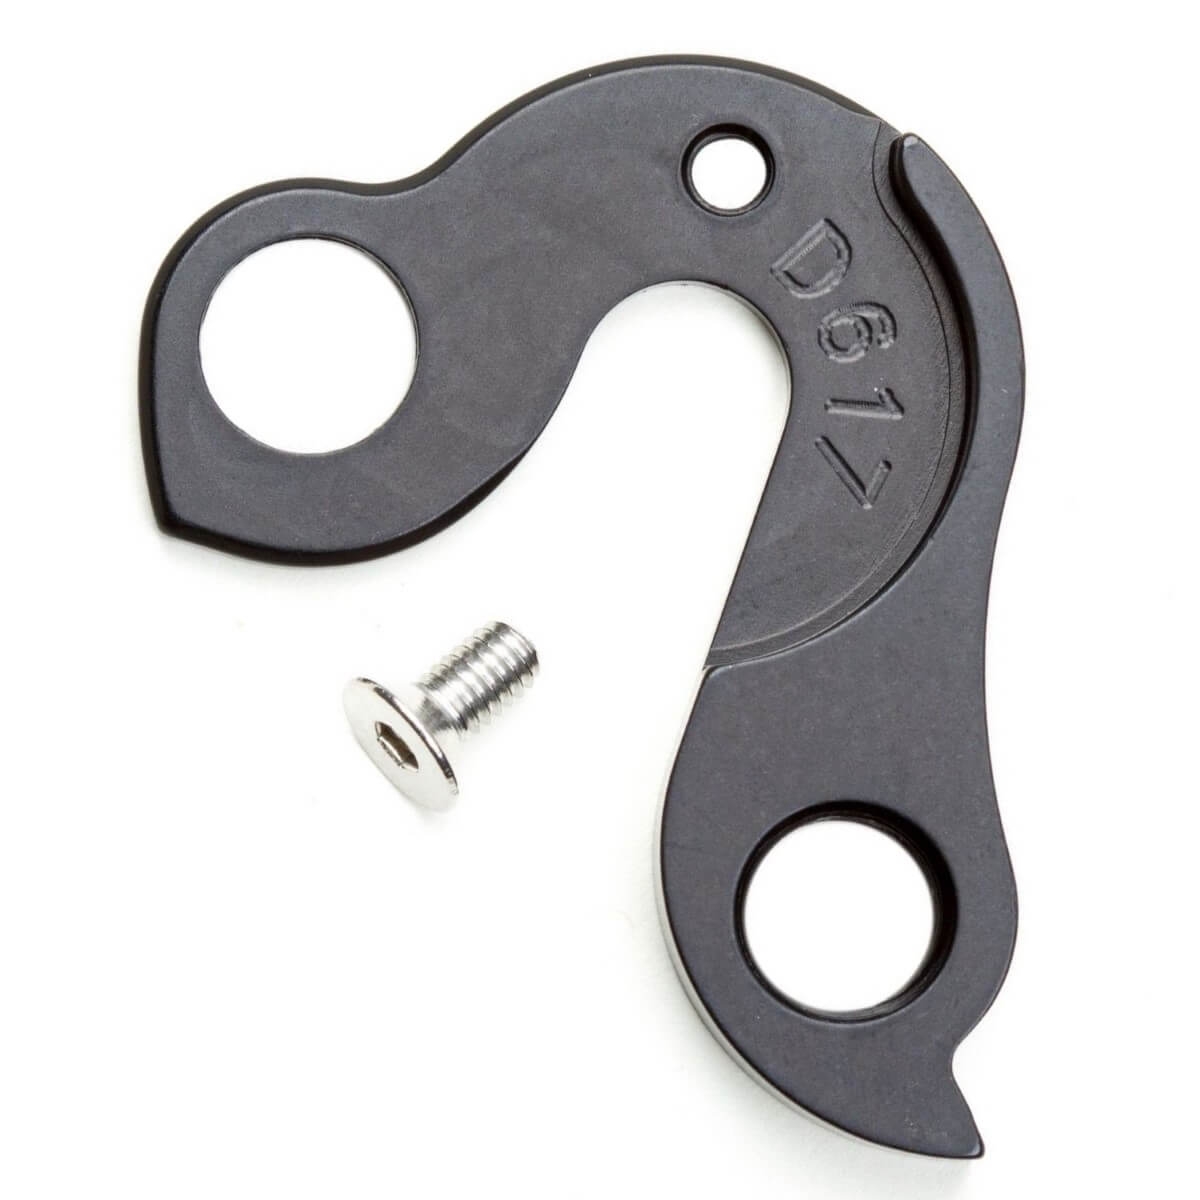 DERAILLEUR HANGER 59 240 for most Felt bikes with mounting bolts 